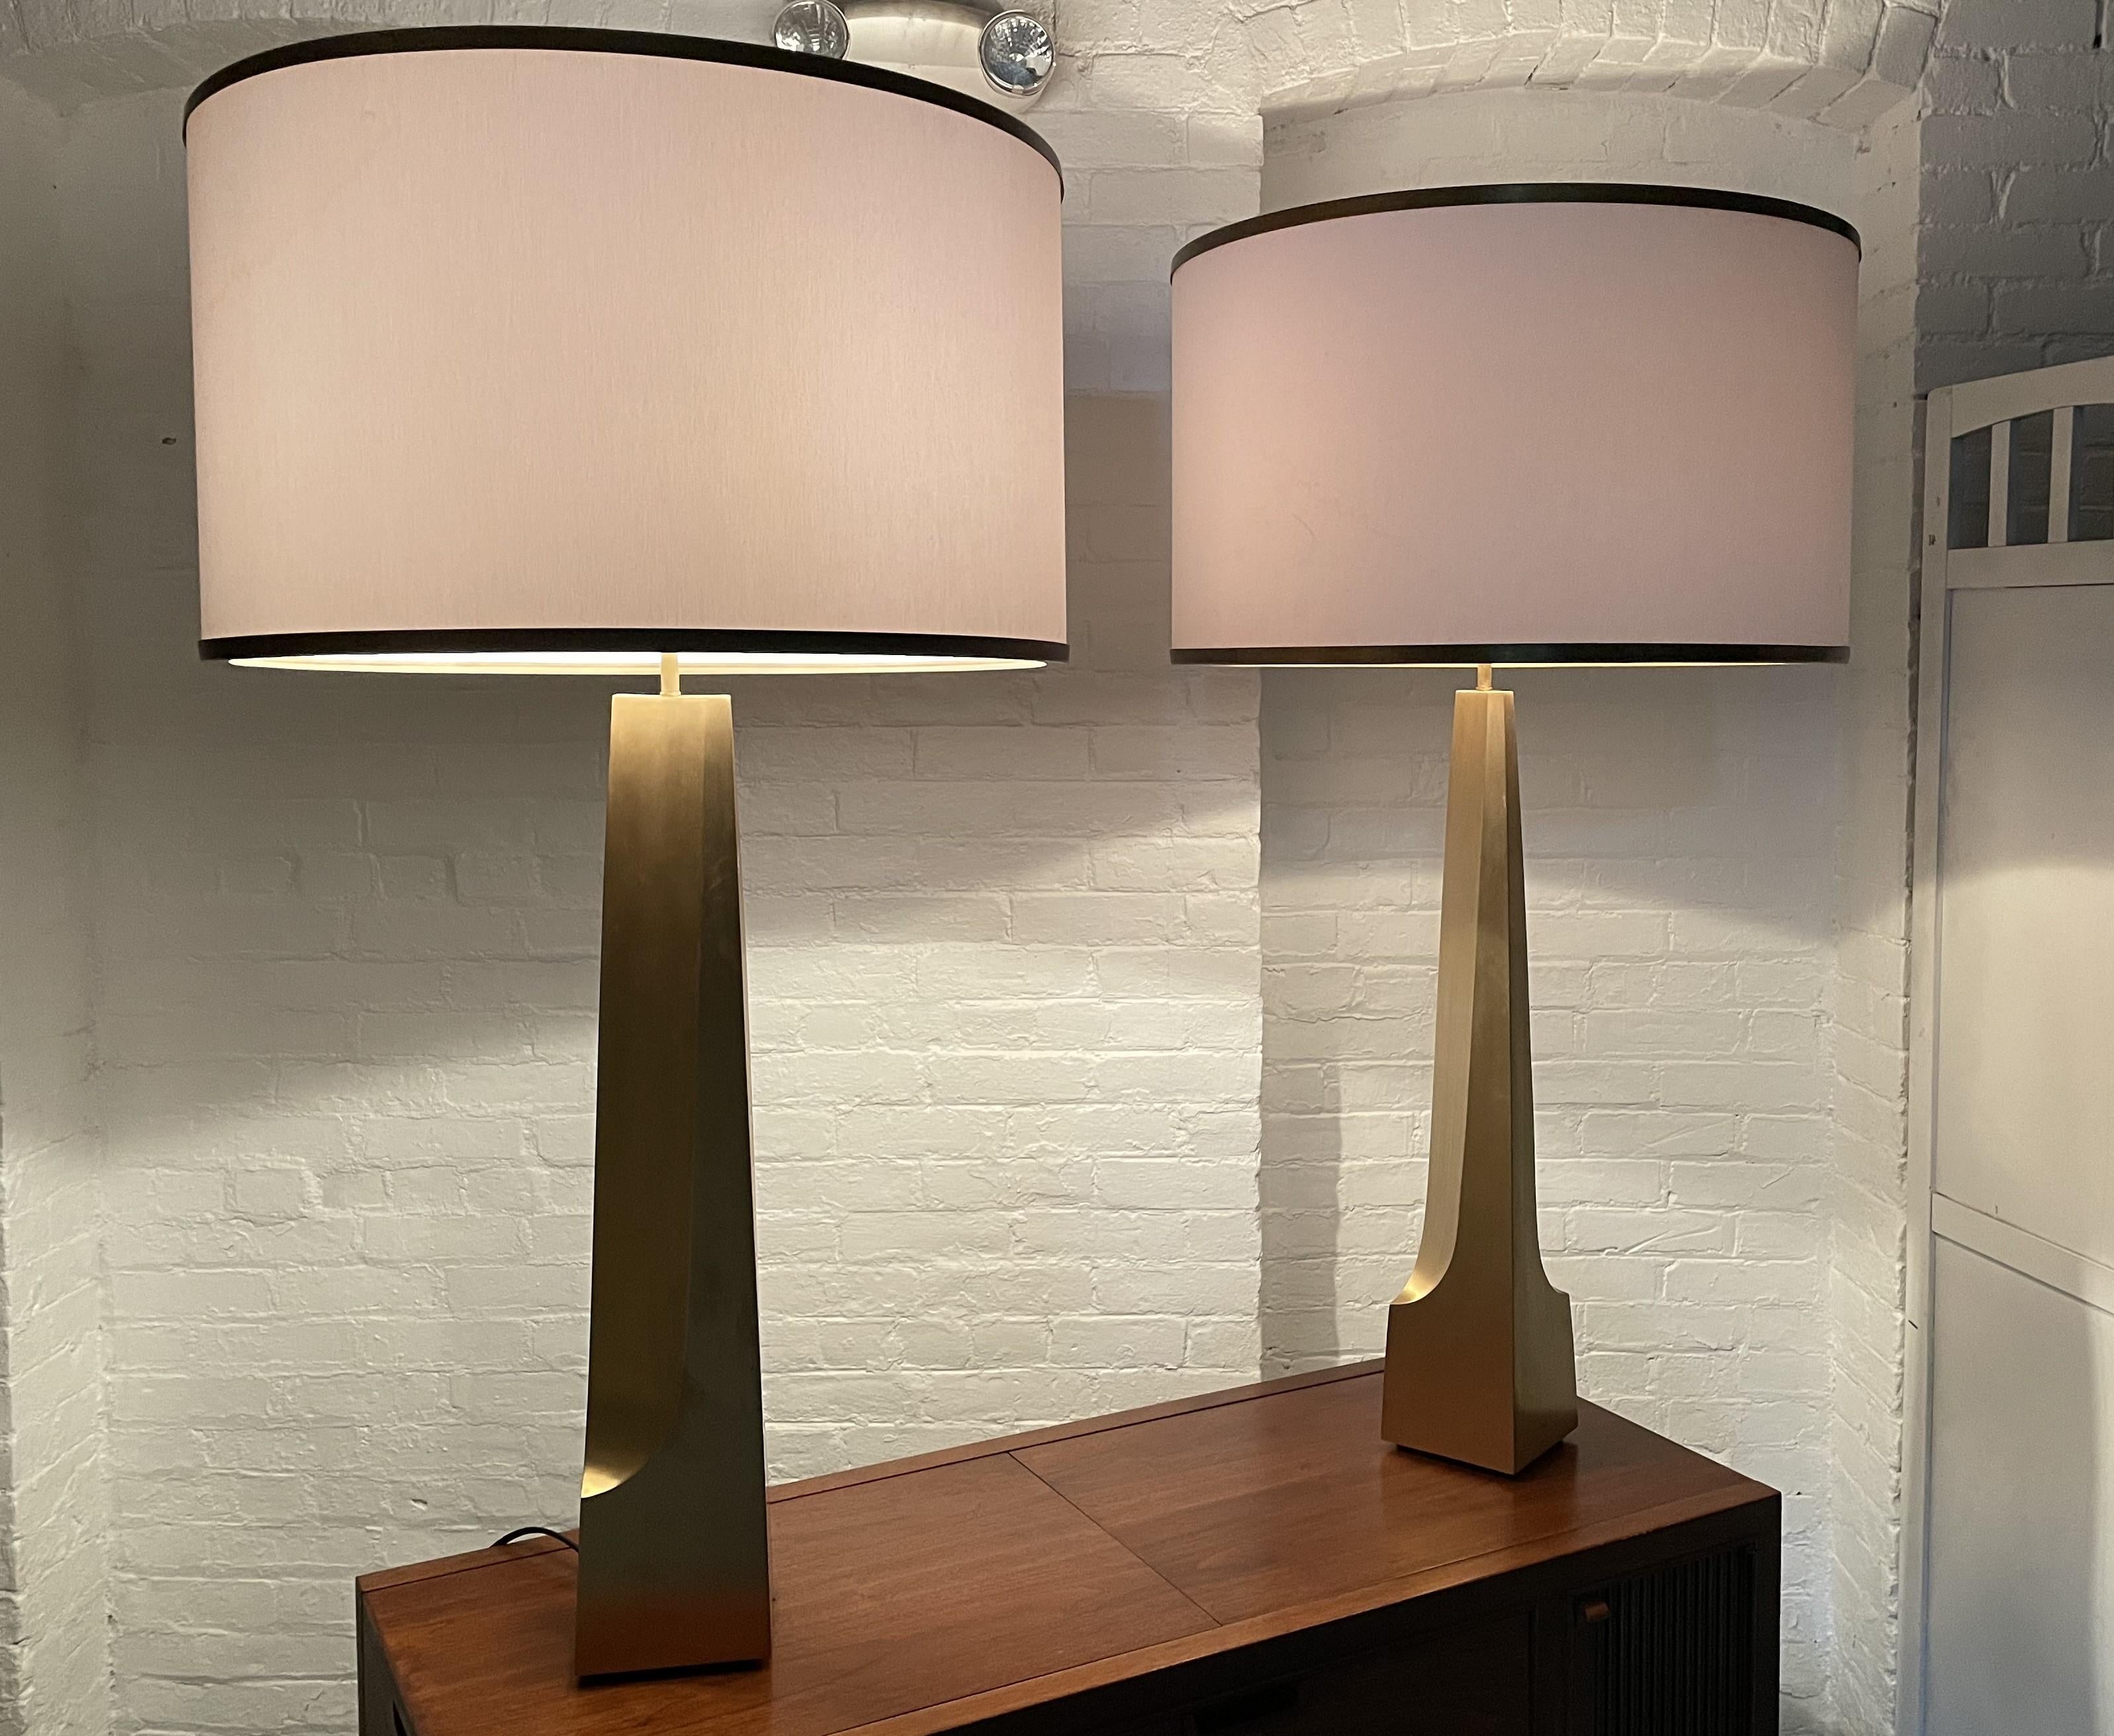 Pair of large solid bronze sculptural lamps. The shades have bronze trim.
Measures: 45.75H. Base: 5.25W x 5.25D.
Shades measures: 24 in diameter x 14.5 height.